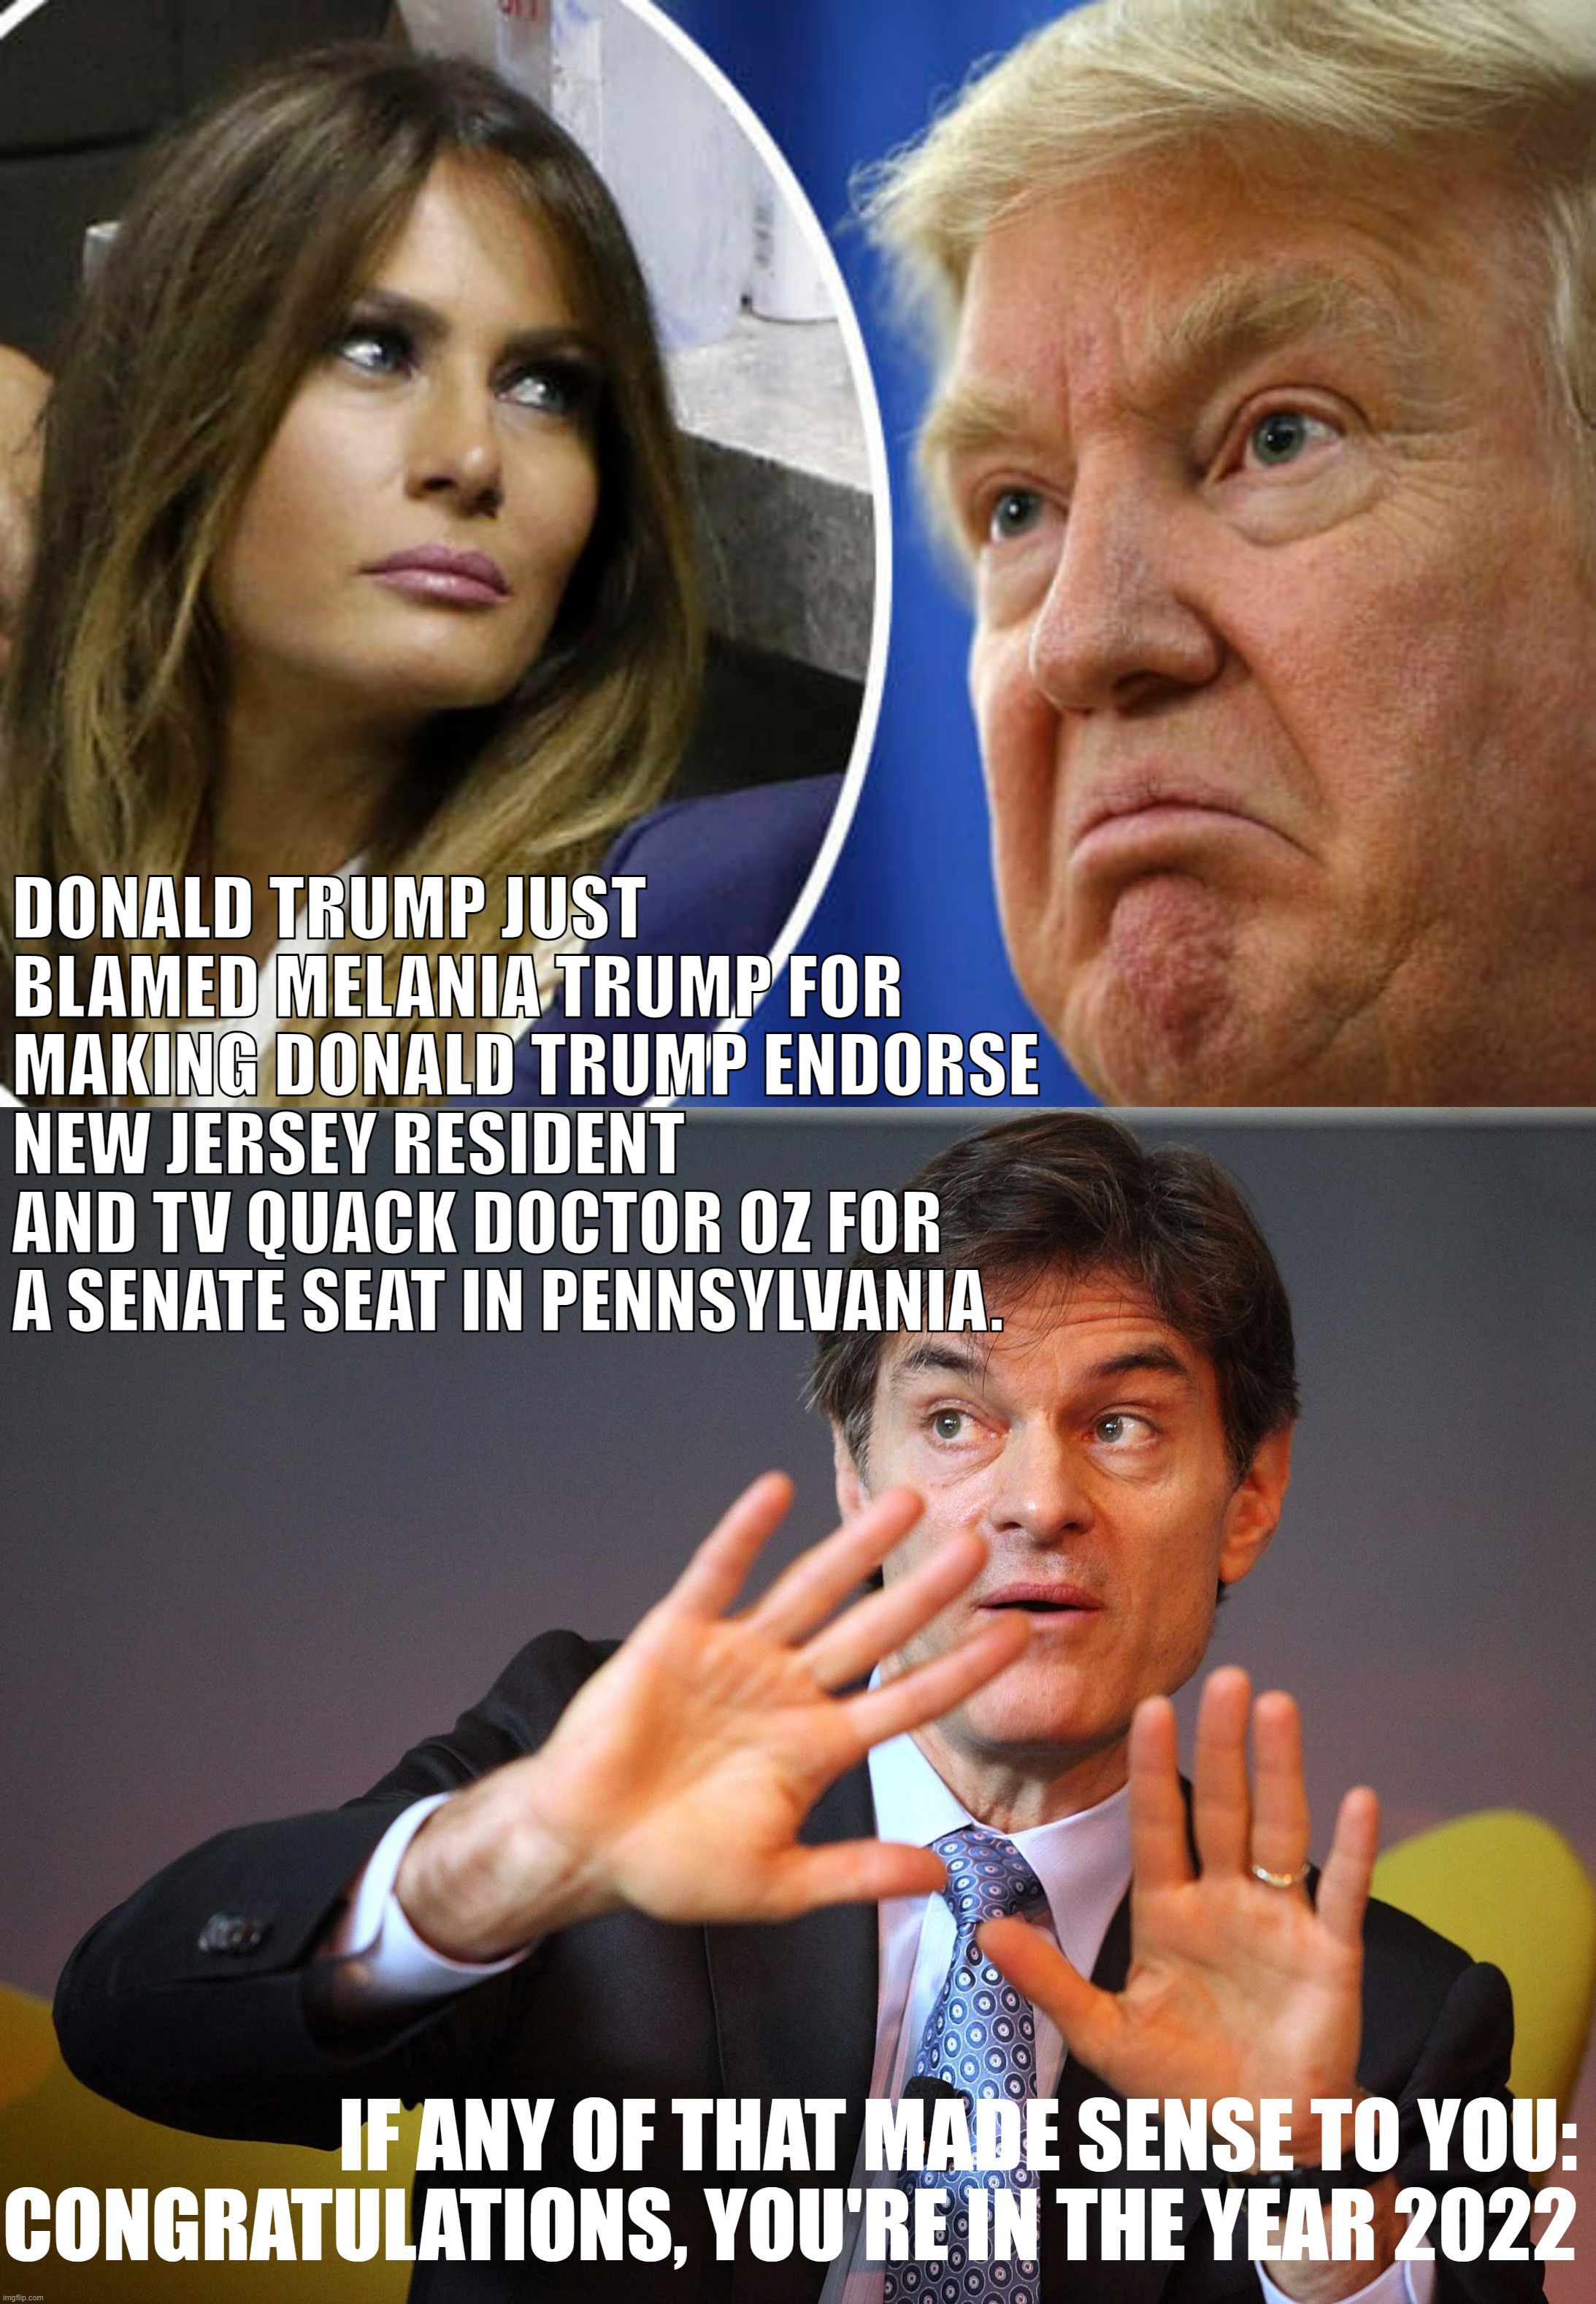 Did you follow? Okay, okay, good - you're up-to-date | DONALD TRUMP JUST BLAMED MELANIA TRUMP FOR MAKING DONALD TRUMP ENDORSE NEW JERSEY RESIDENT AND TV QUACK DOCTOR OZ FOR A SENATE SEAT IN PENNSYLVANIA. IF ANY OF THAT MADE SENSE TO YOU: CONGRATULATIONS, YOU'RE IN THE YEAR 2022 | image tagged in trump and melania,dr oz,trump is an asshole,trump is a moron,midterms,2022 | made w/ Imgflip meme maker